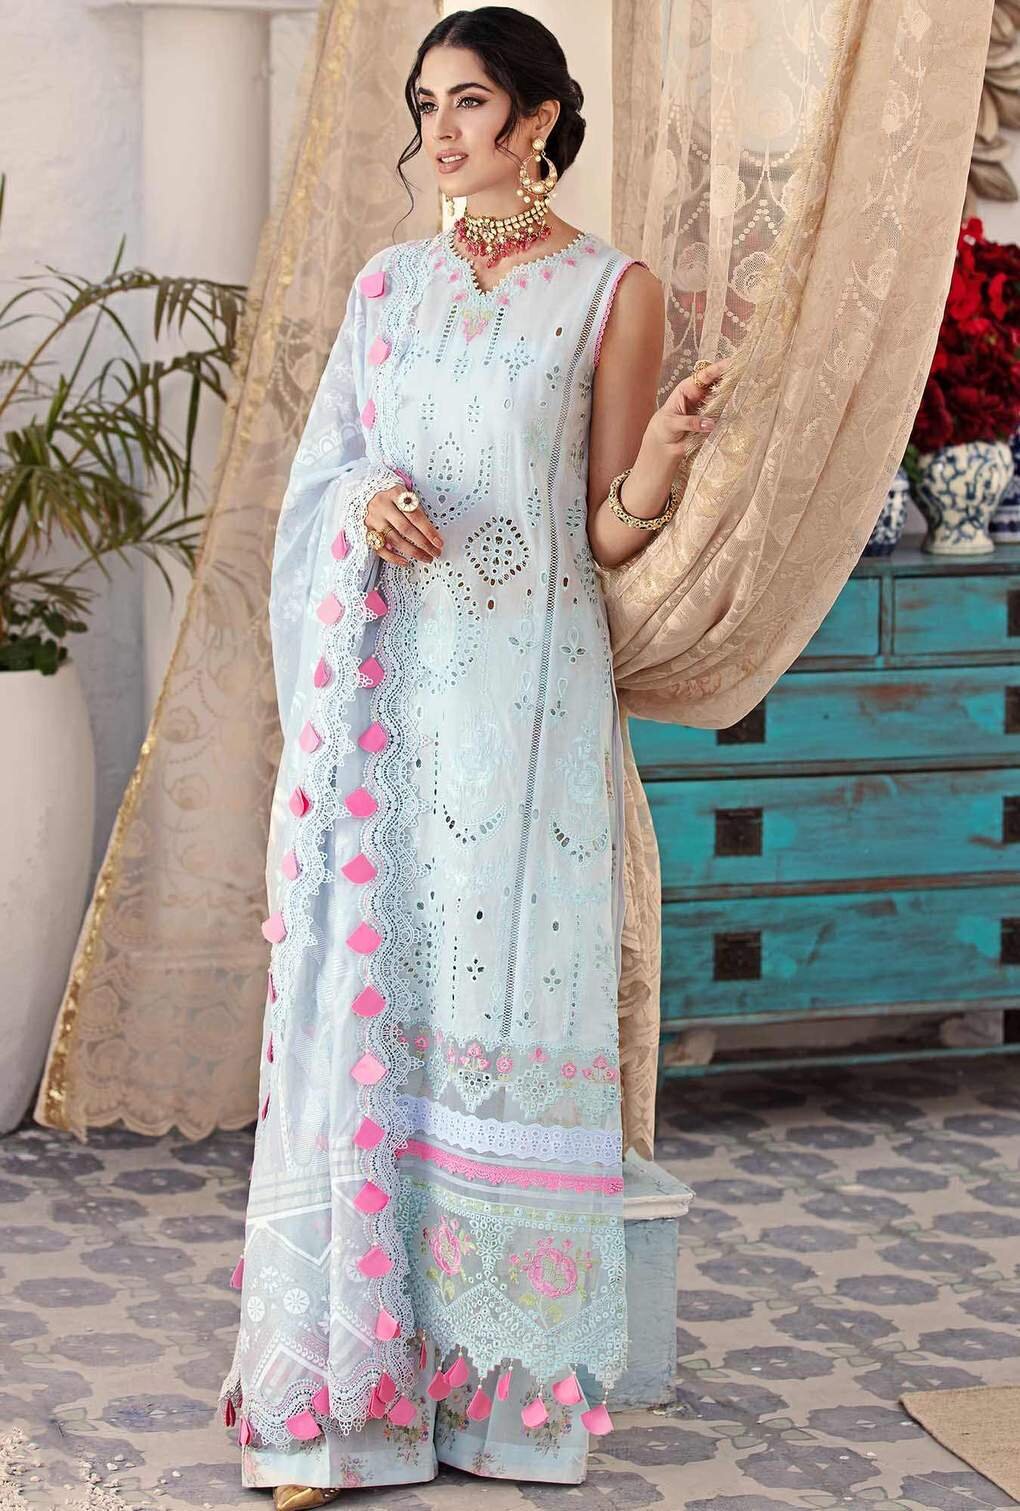 Noor by Saadia Asad - NOOR CHIKANKARI LAWN 2021 Blue Lawn Suit from Lebaasonline Largest Pakistani Clothes Stockist in the UK Shop Noor Pakistani Lawn 2021 EID COLLECTION IMROZIA COLLECTION 2021 MUZLIN EID COLLECTION '21 ONLINE UK for Wedding, Party & NIKAH OUTFIT Indian & Pakistani Summer Dresses UK Manchester & USA